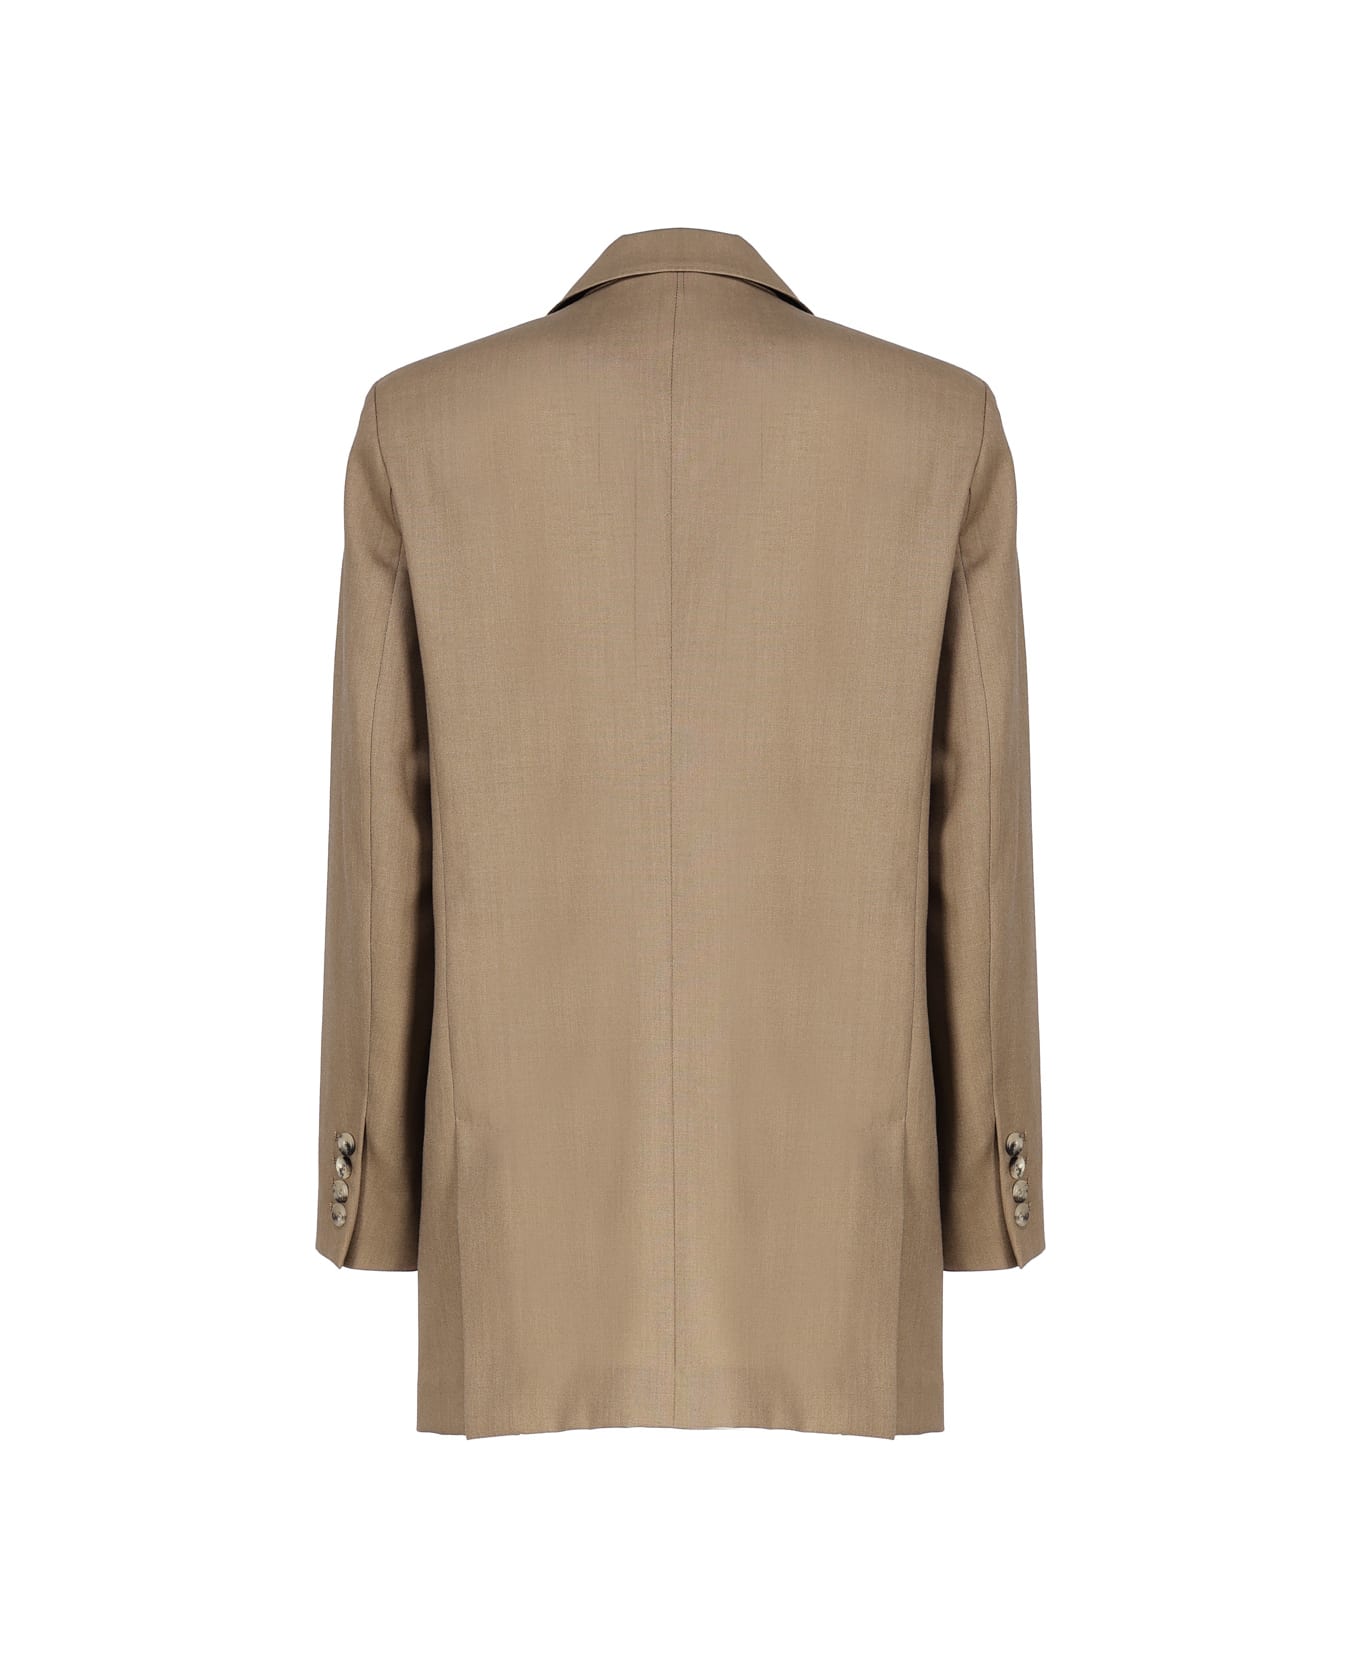 Max Mara Double Breasted Blazer In Wool Blend - Camel